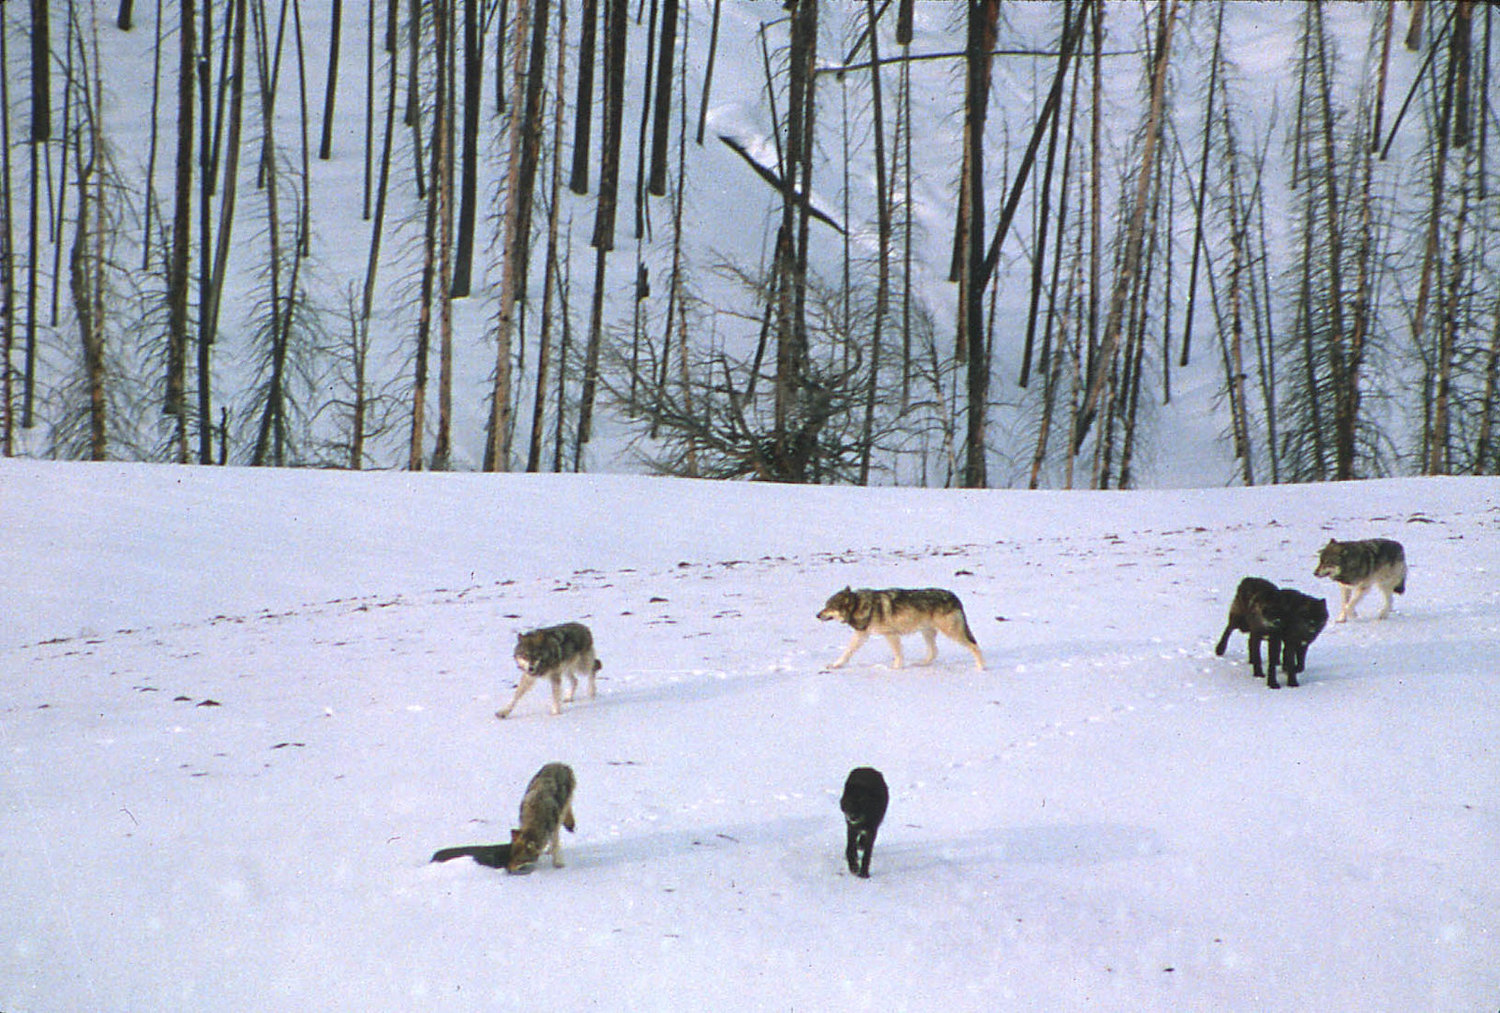 A pack of Gray Wolves standing in the snow in a national park.